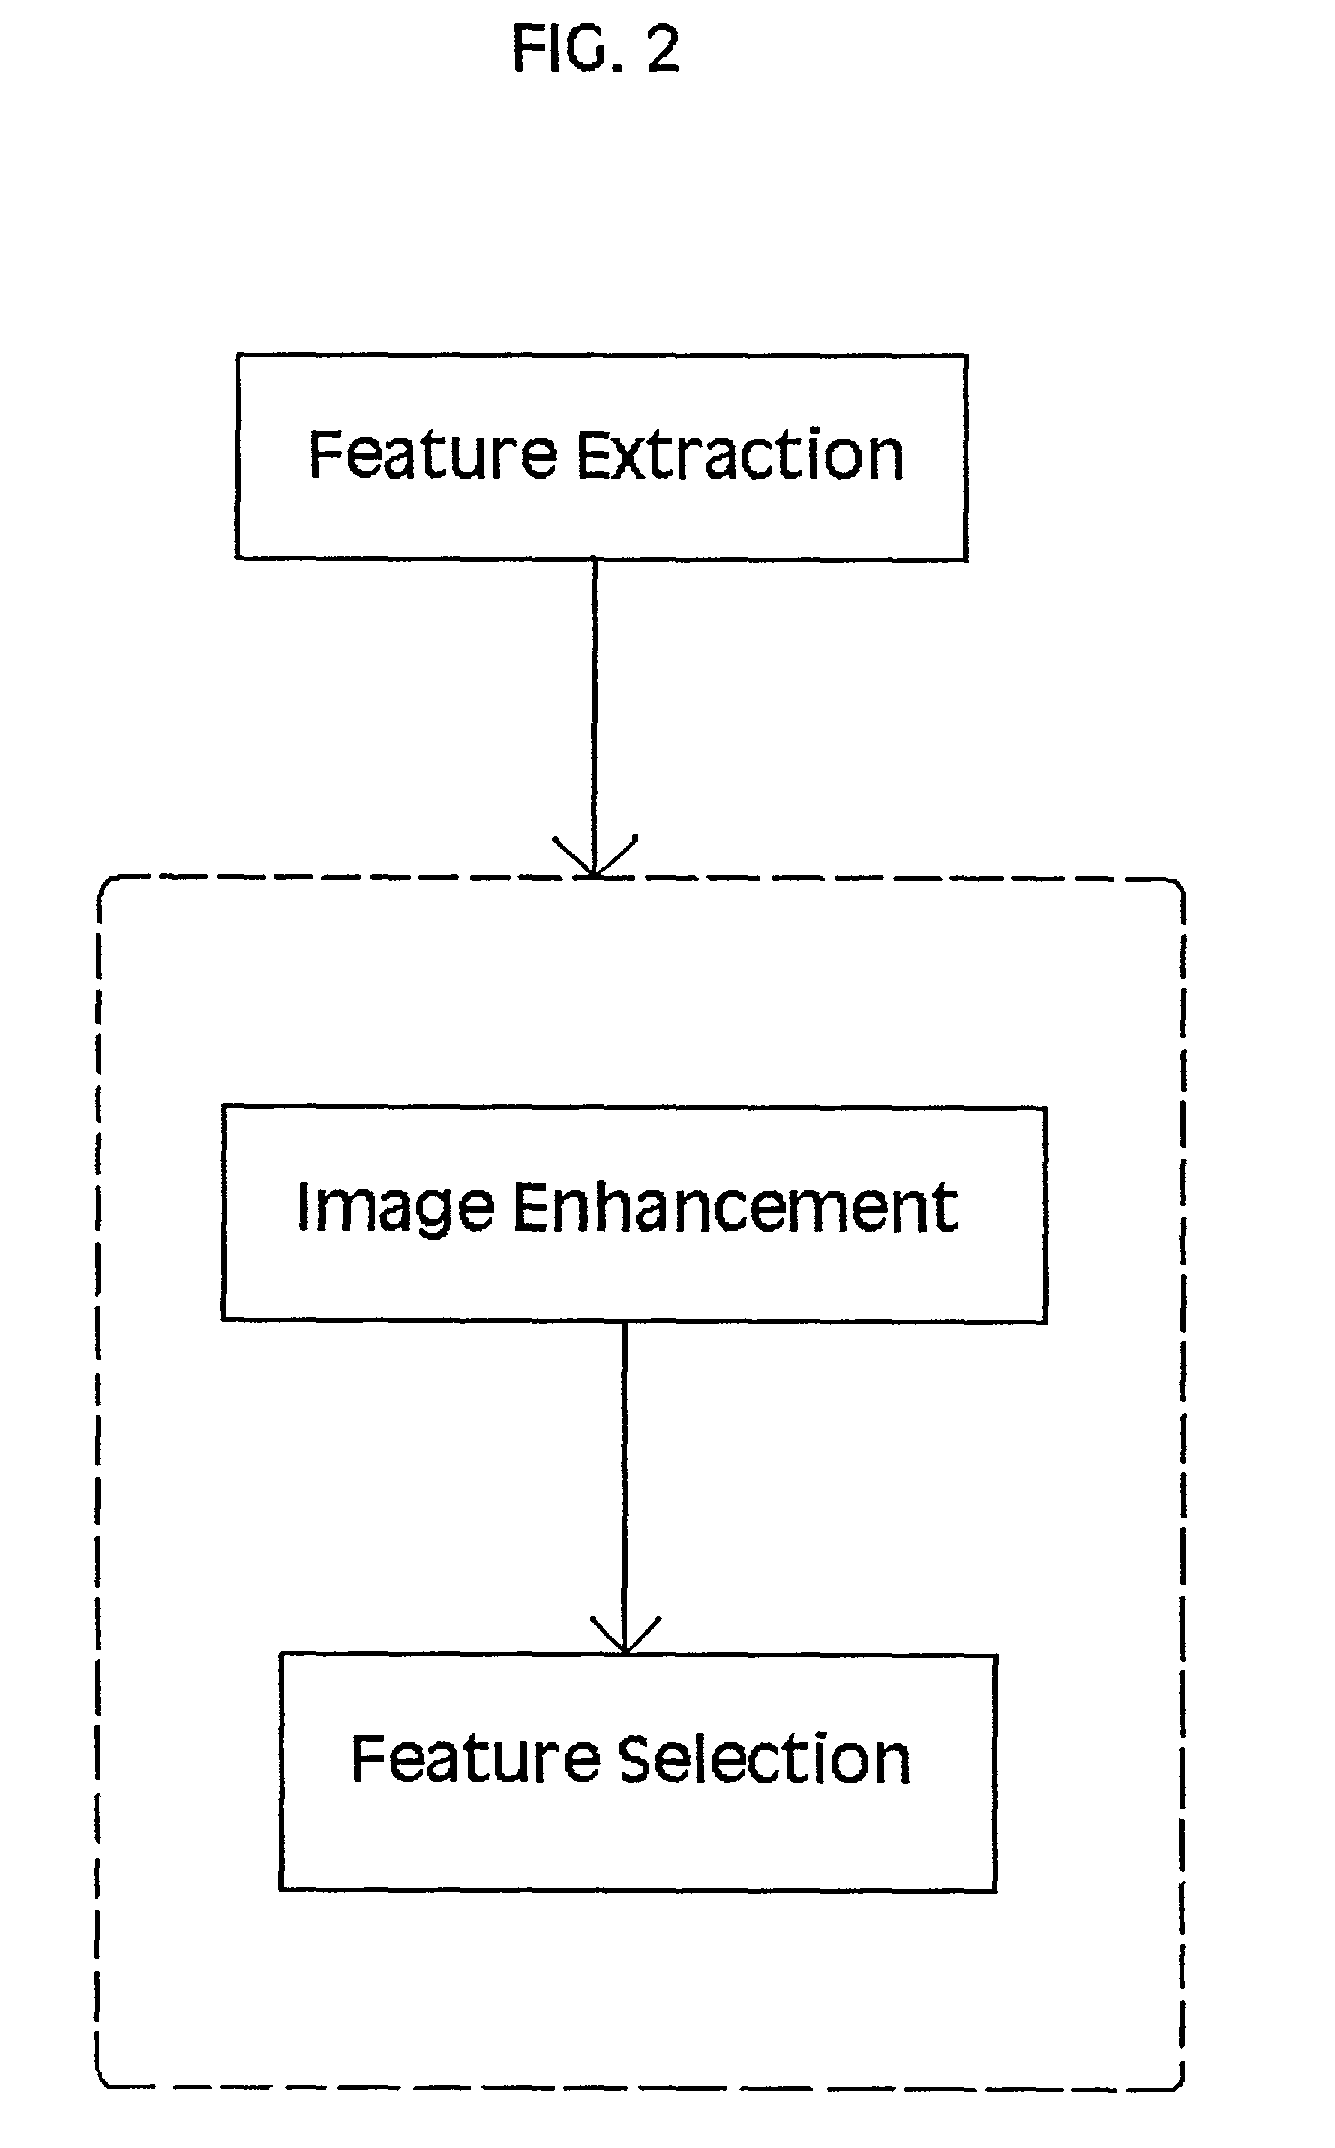 Partial differential equation model for image feature extraction and identification